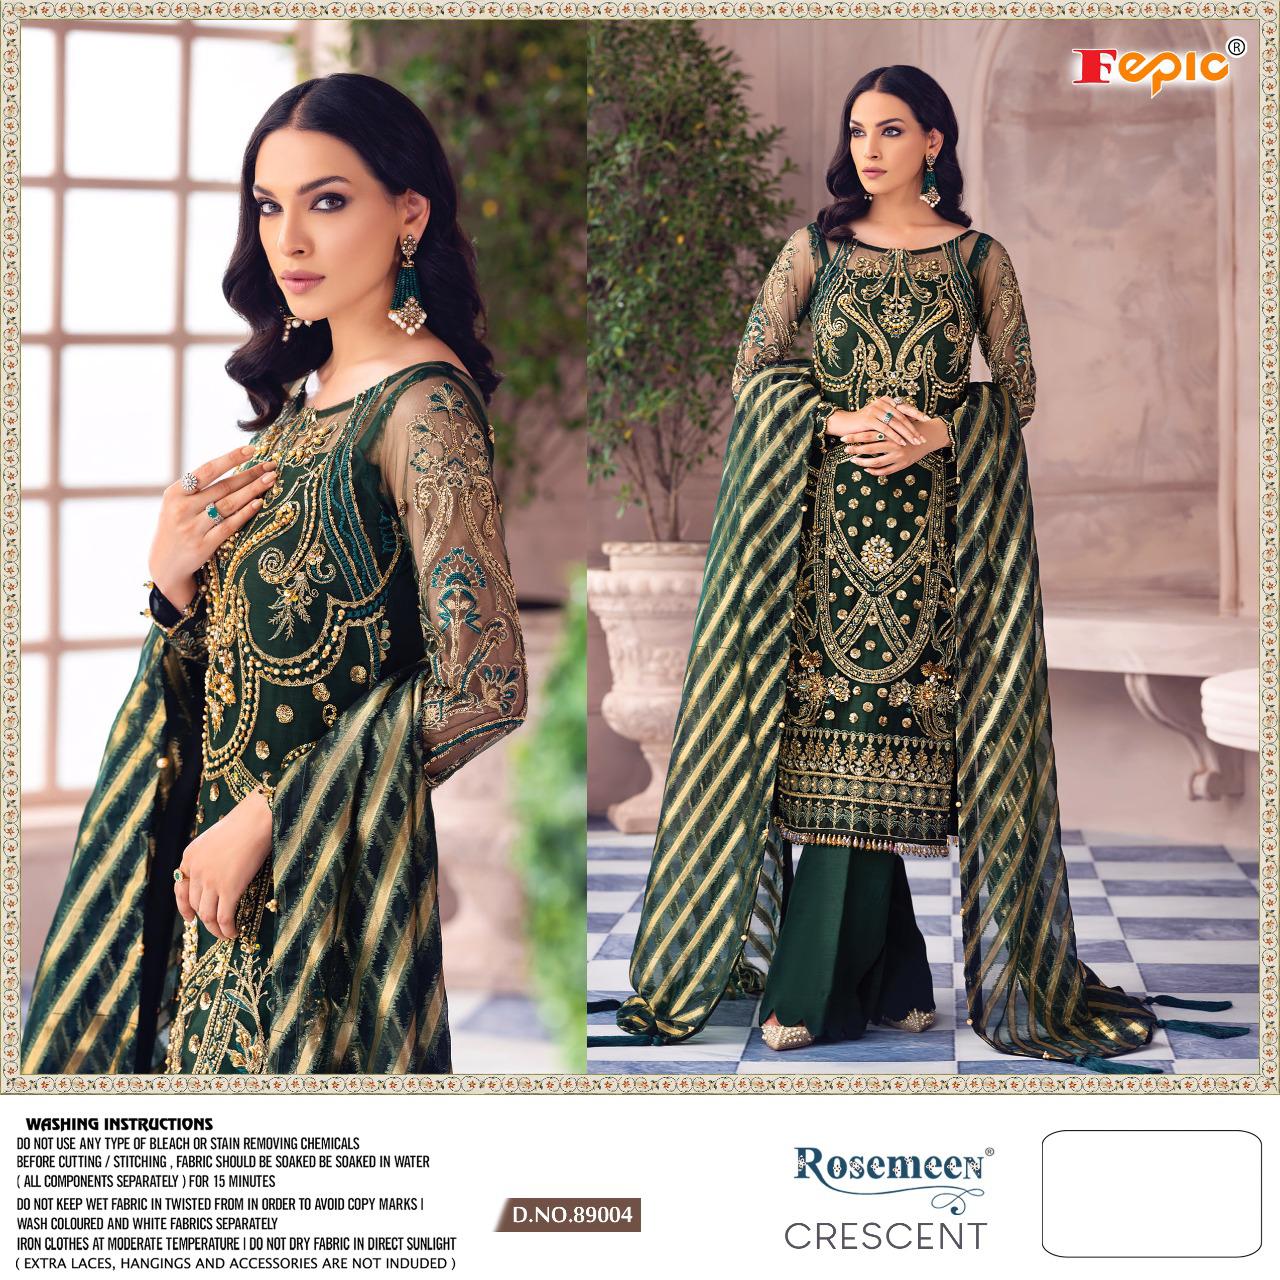 Fepic Rosemeen Crescent Net Heavy Embroidered With Handwork Suits Wholesale